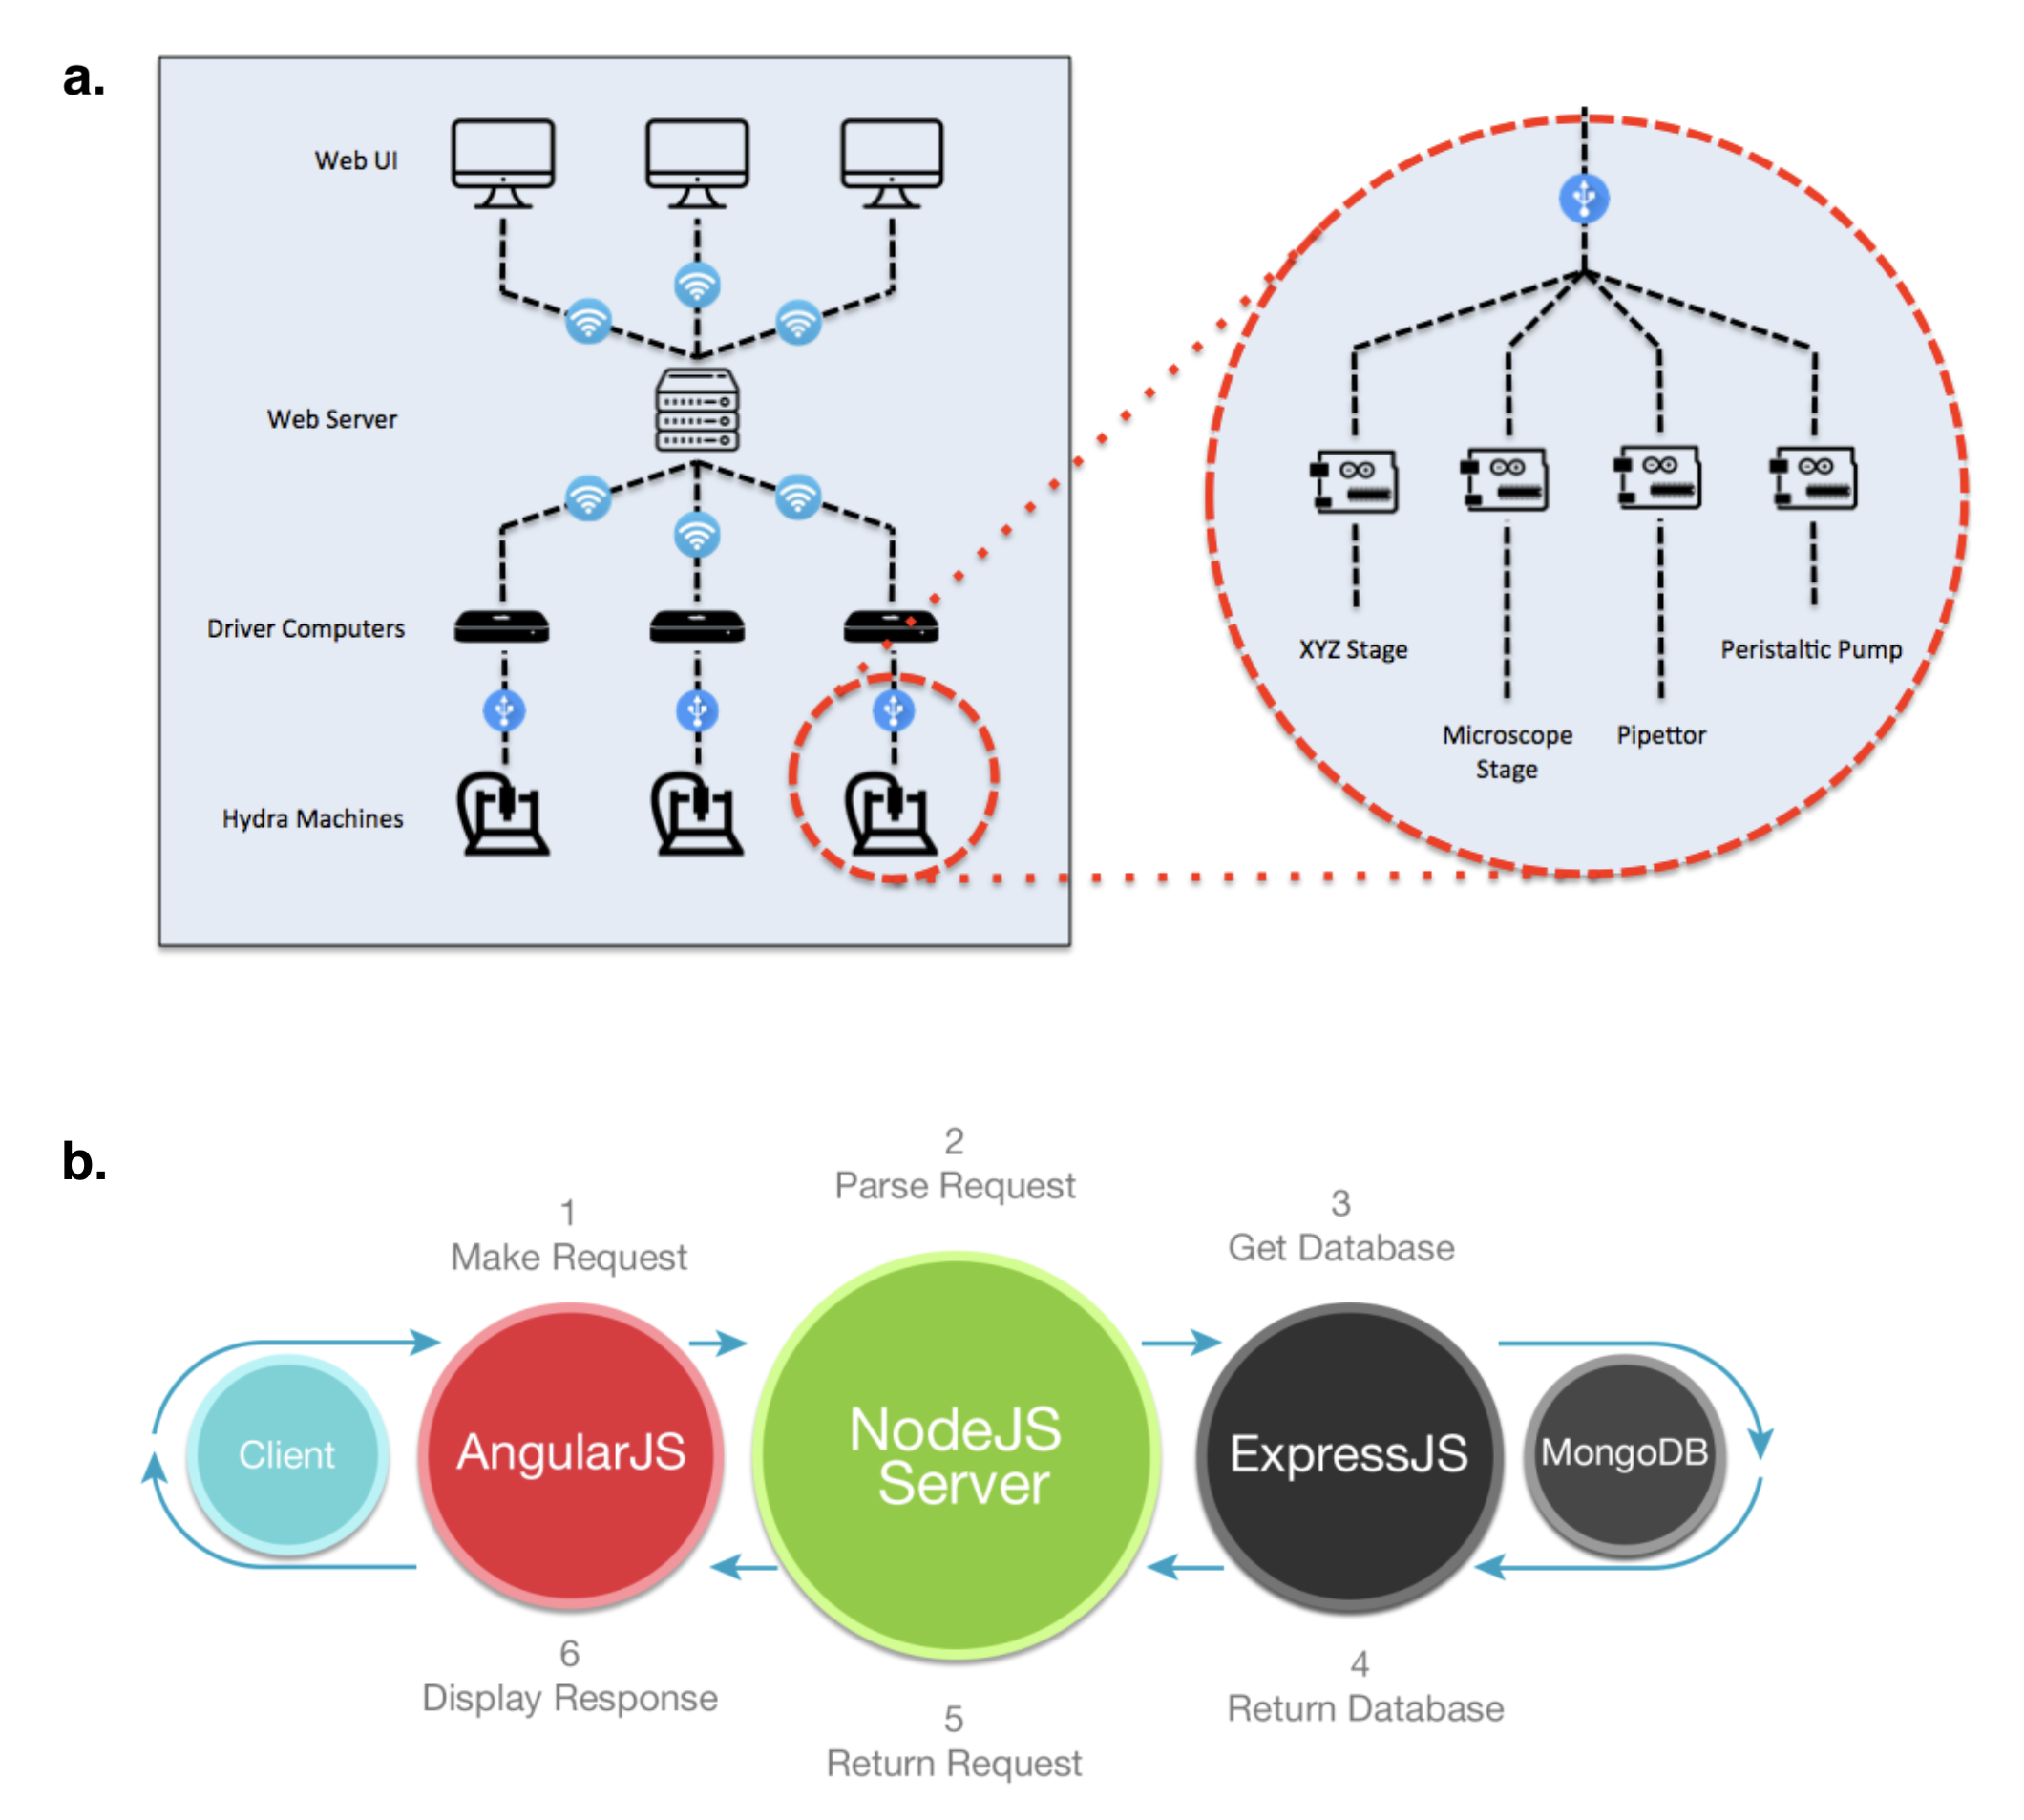 (a) A schematic of the robot control network. (b) A schematic of the software stack and dataflow.